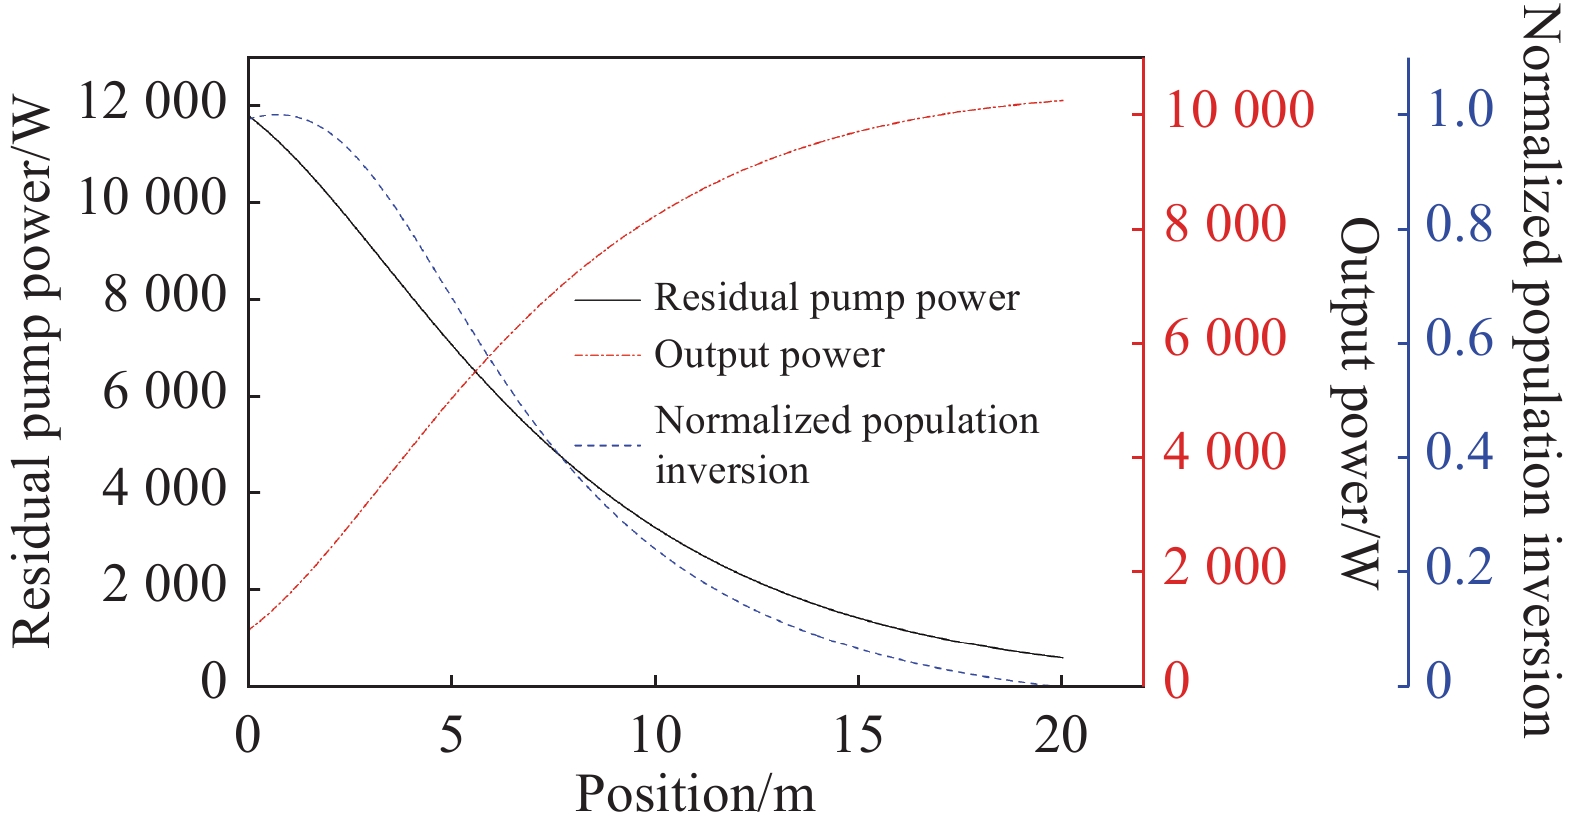 Forward signal, pump power and normalized population inversion of fiber amplifier as functions of fiber position z （Pp(0)=11.8 kW、Ps+(0)=1 kW）